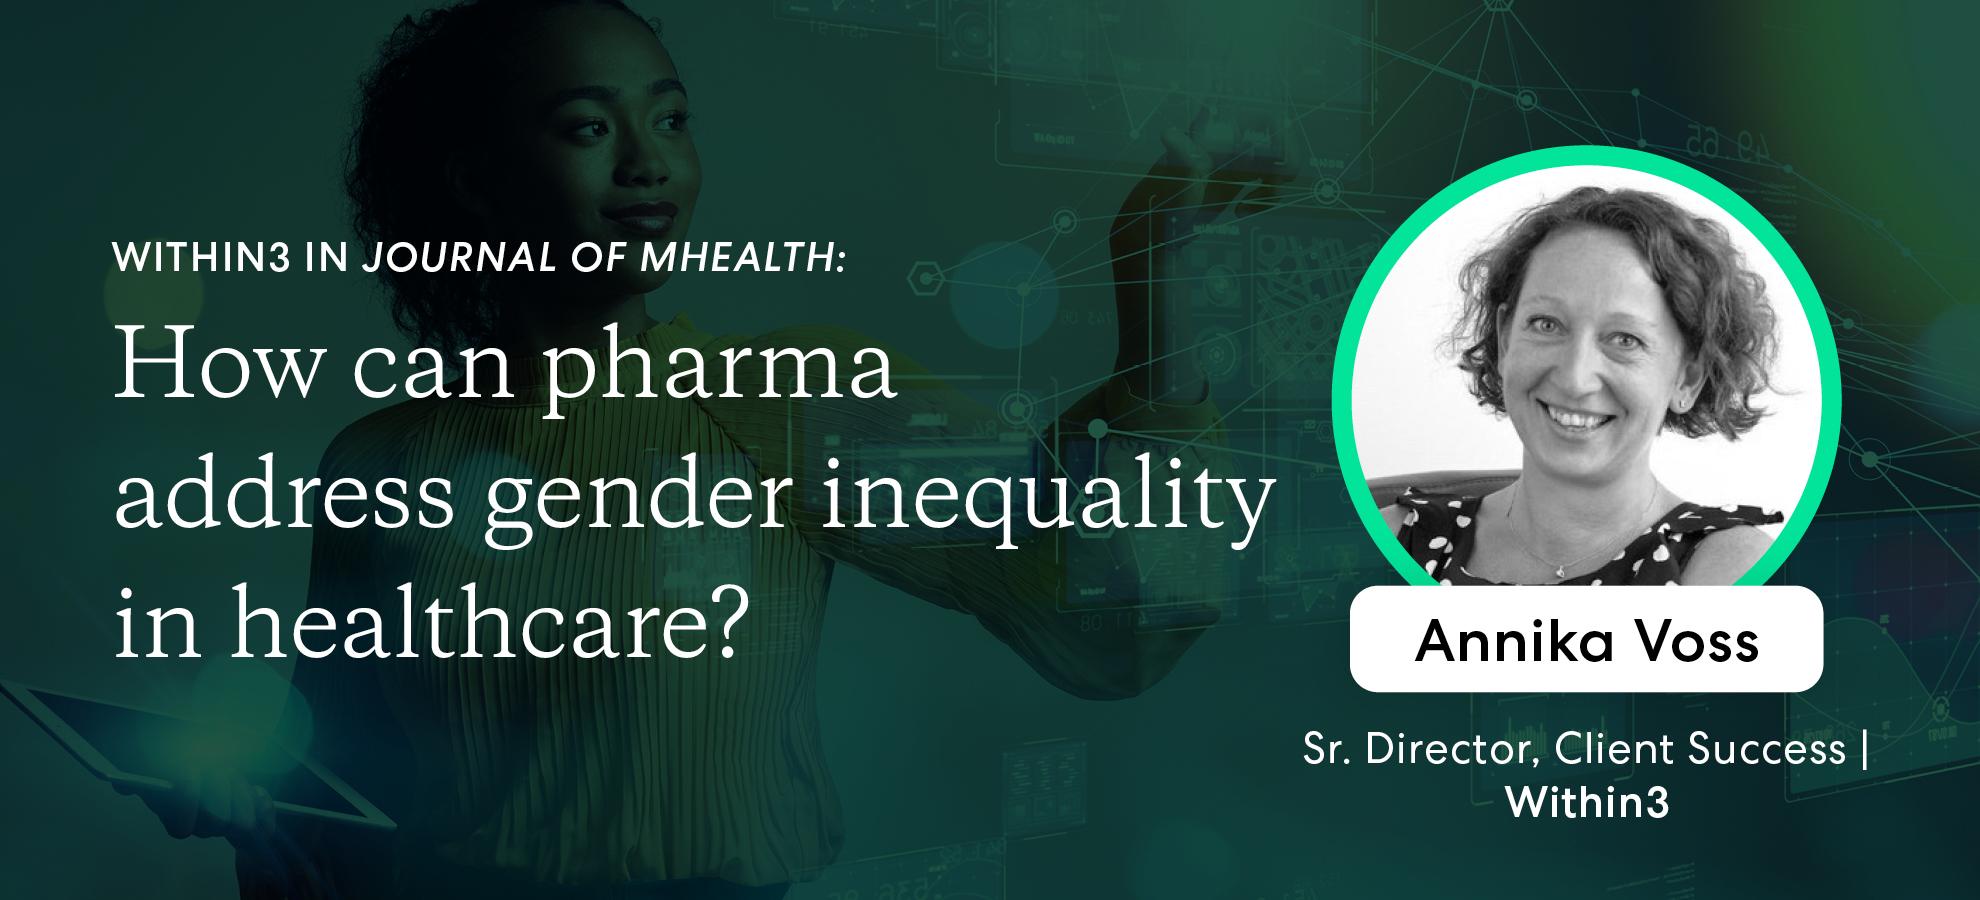 Within3 in Journal of mHealth: how can pharma address gender inequality in healthcare?